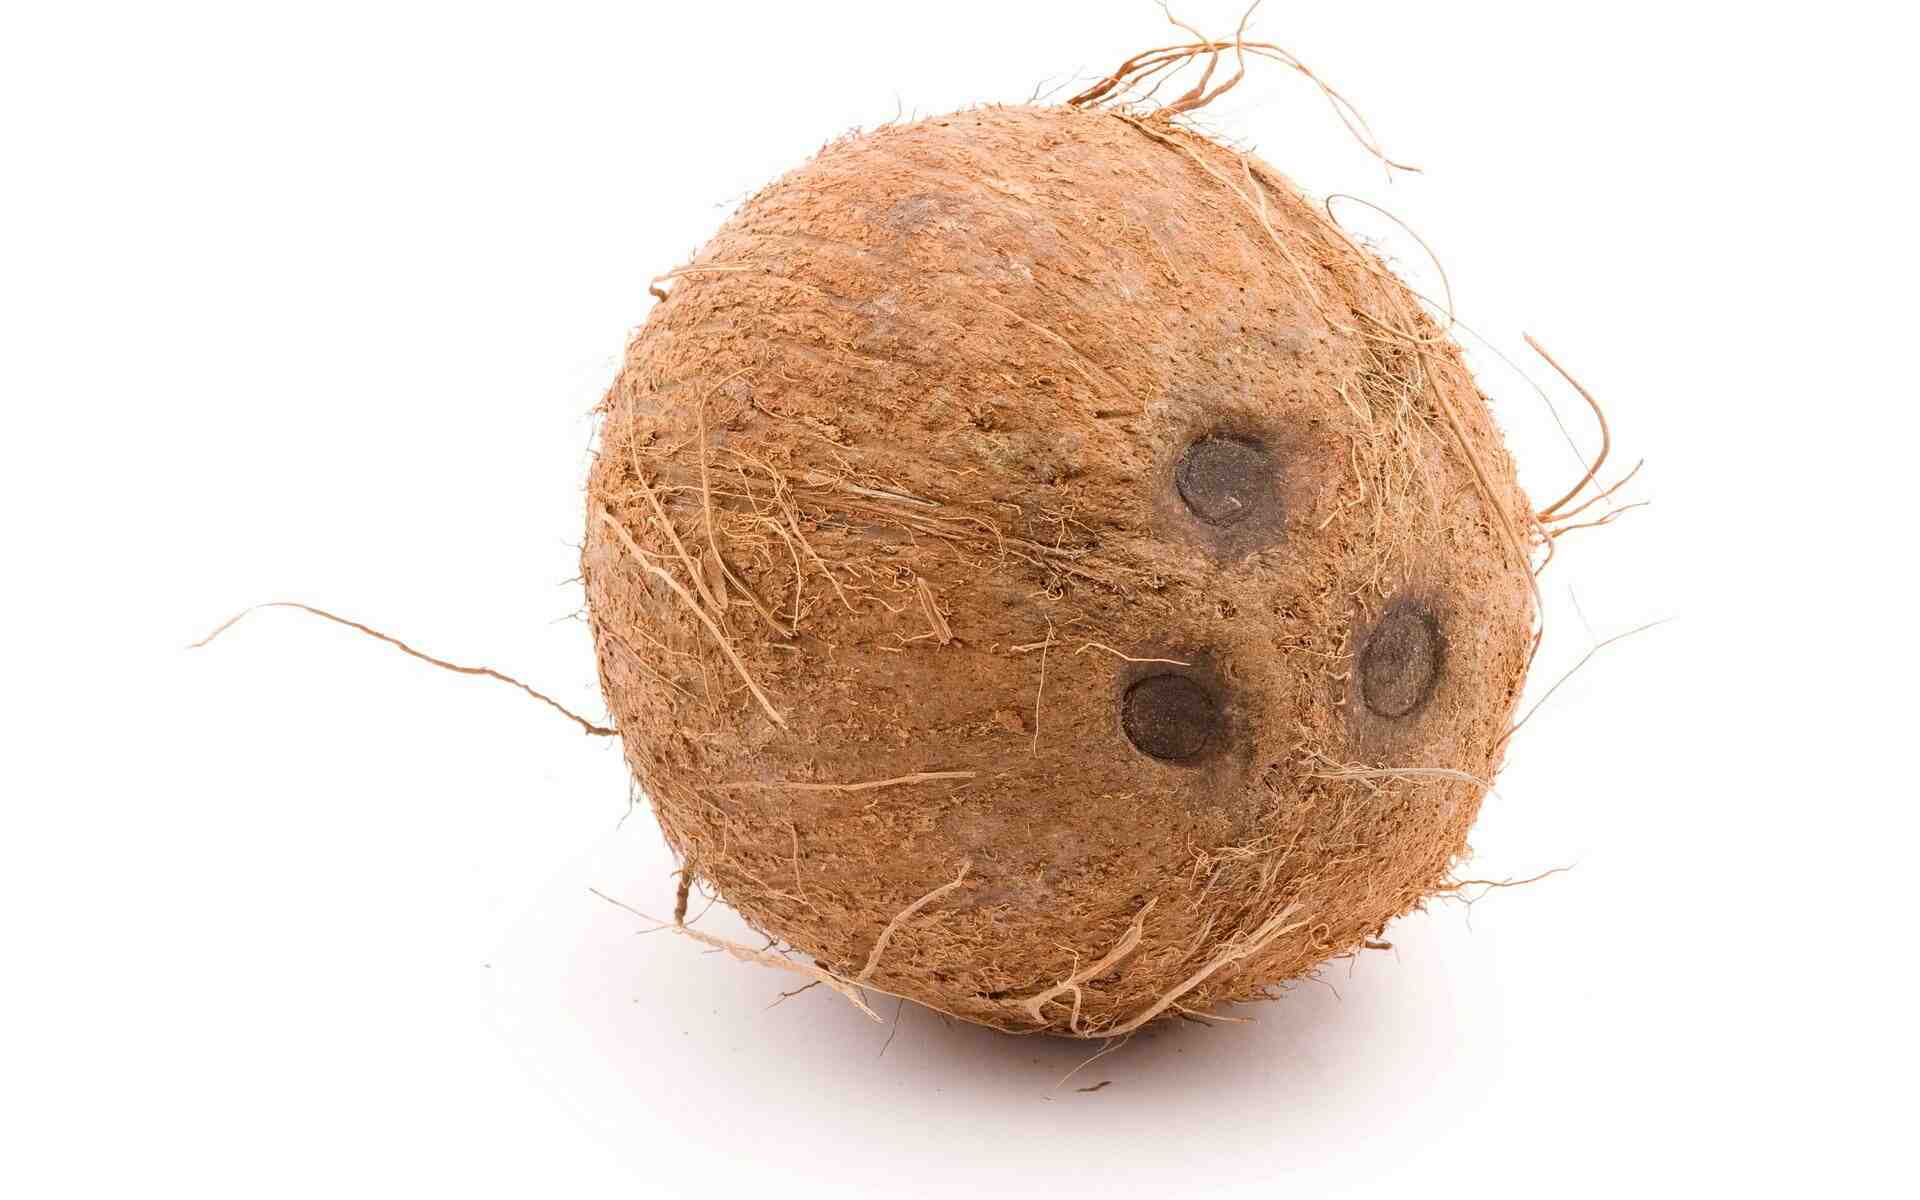 What are the three holes in a coconut called?